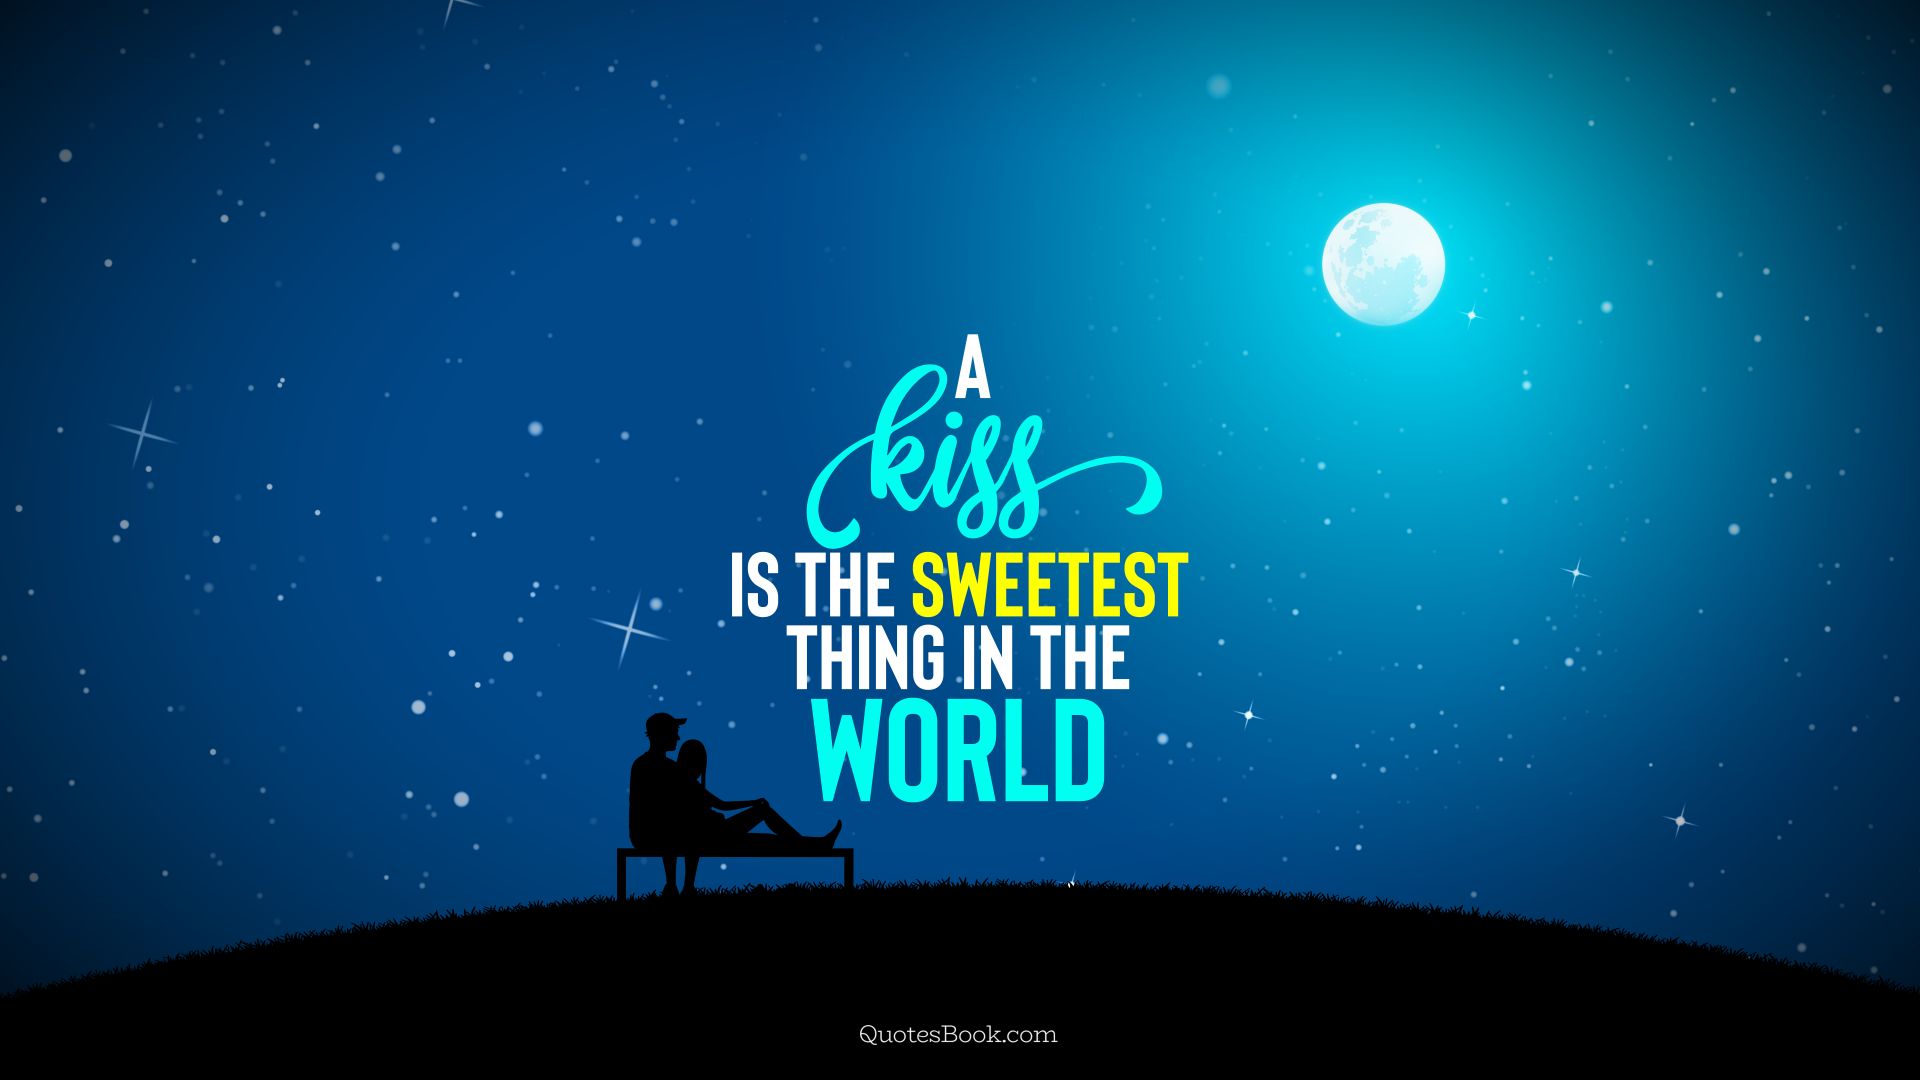 A kiss is the sweetest thing in the world. - Quote by QuotesBook